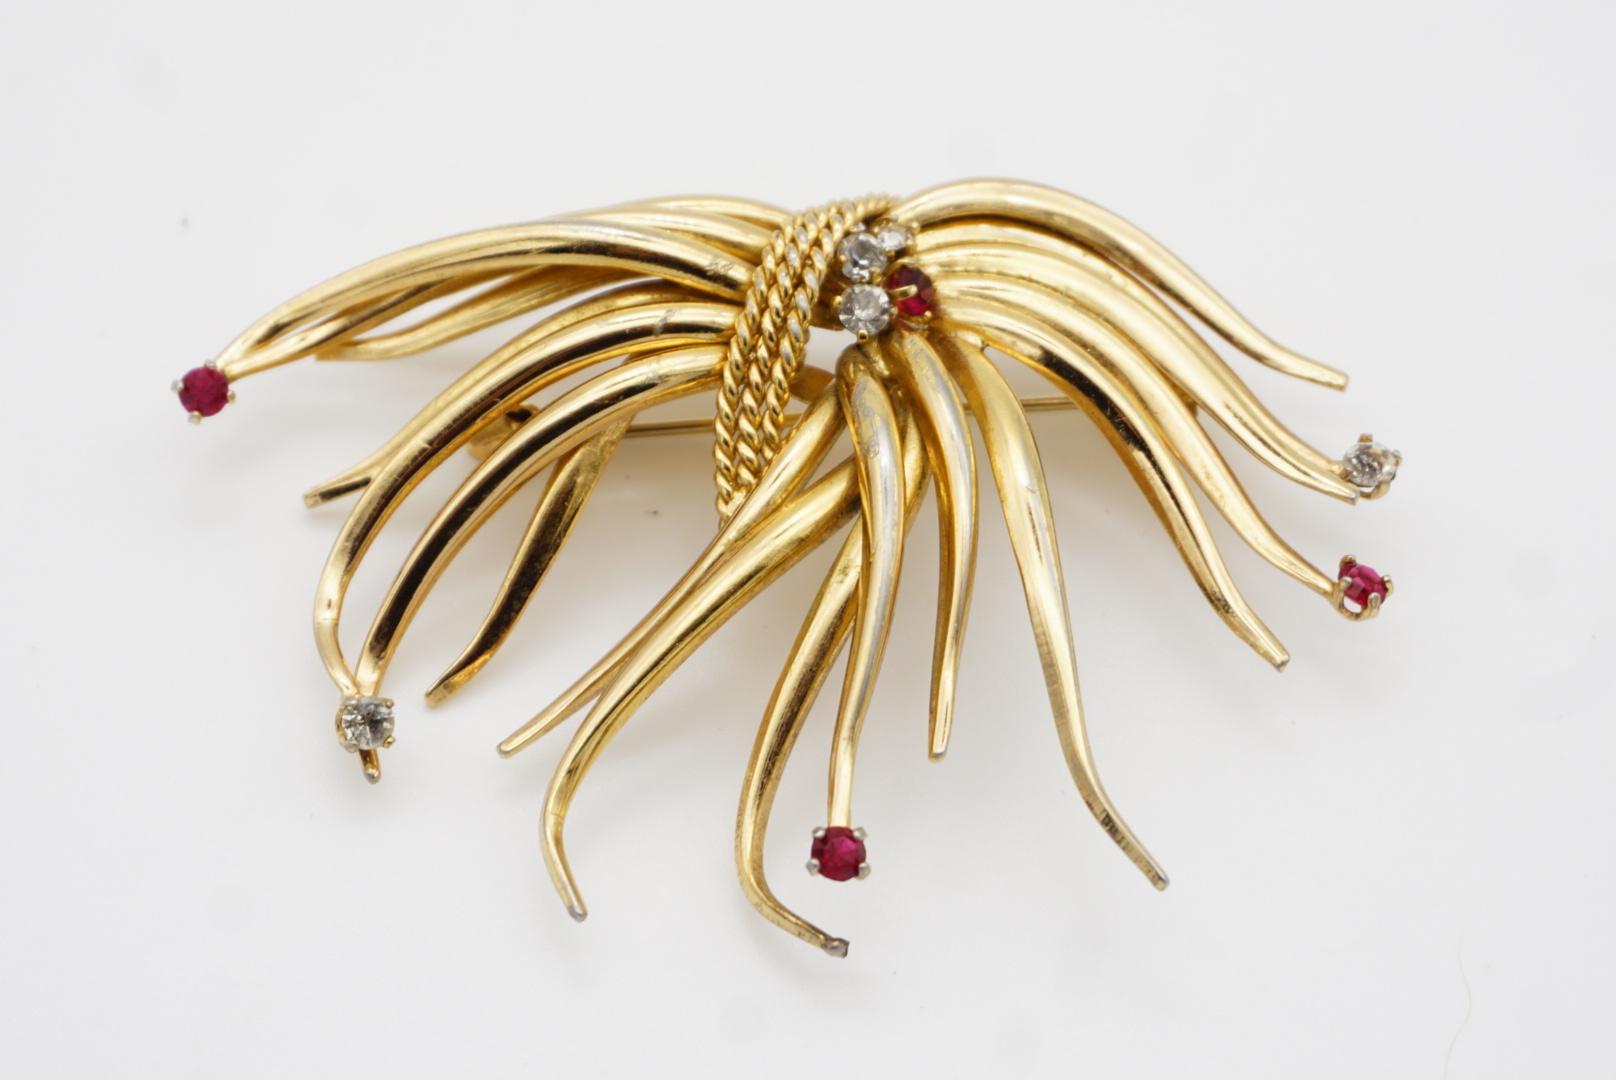 Christian Dior GROSSE 1962 Vintage Large Intertwined Flower Ruby Crystals Brooch For Sale 5